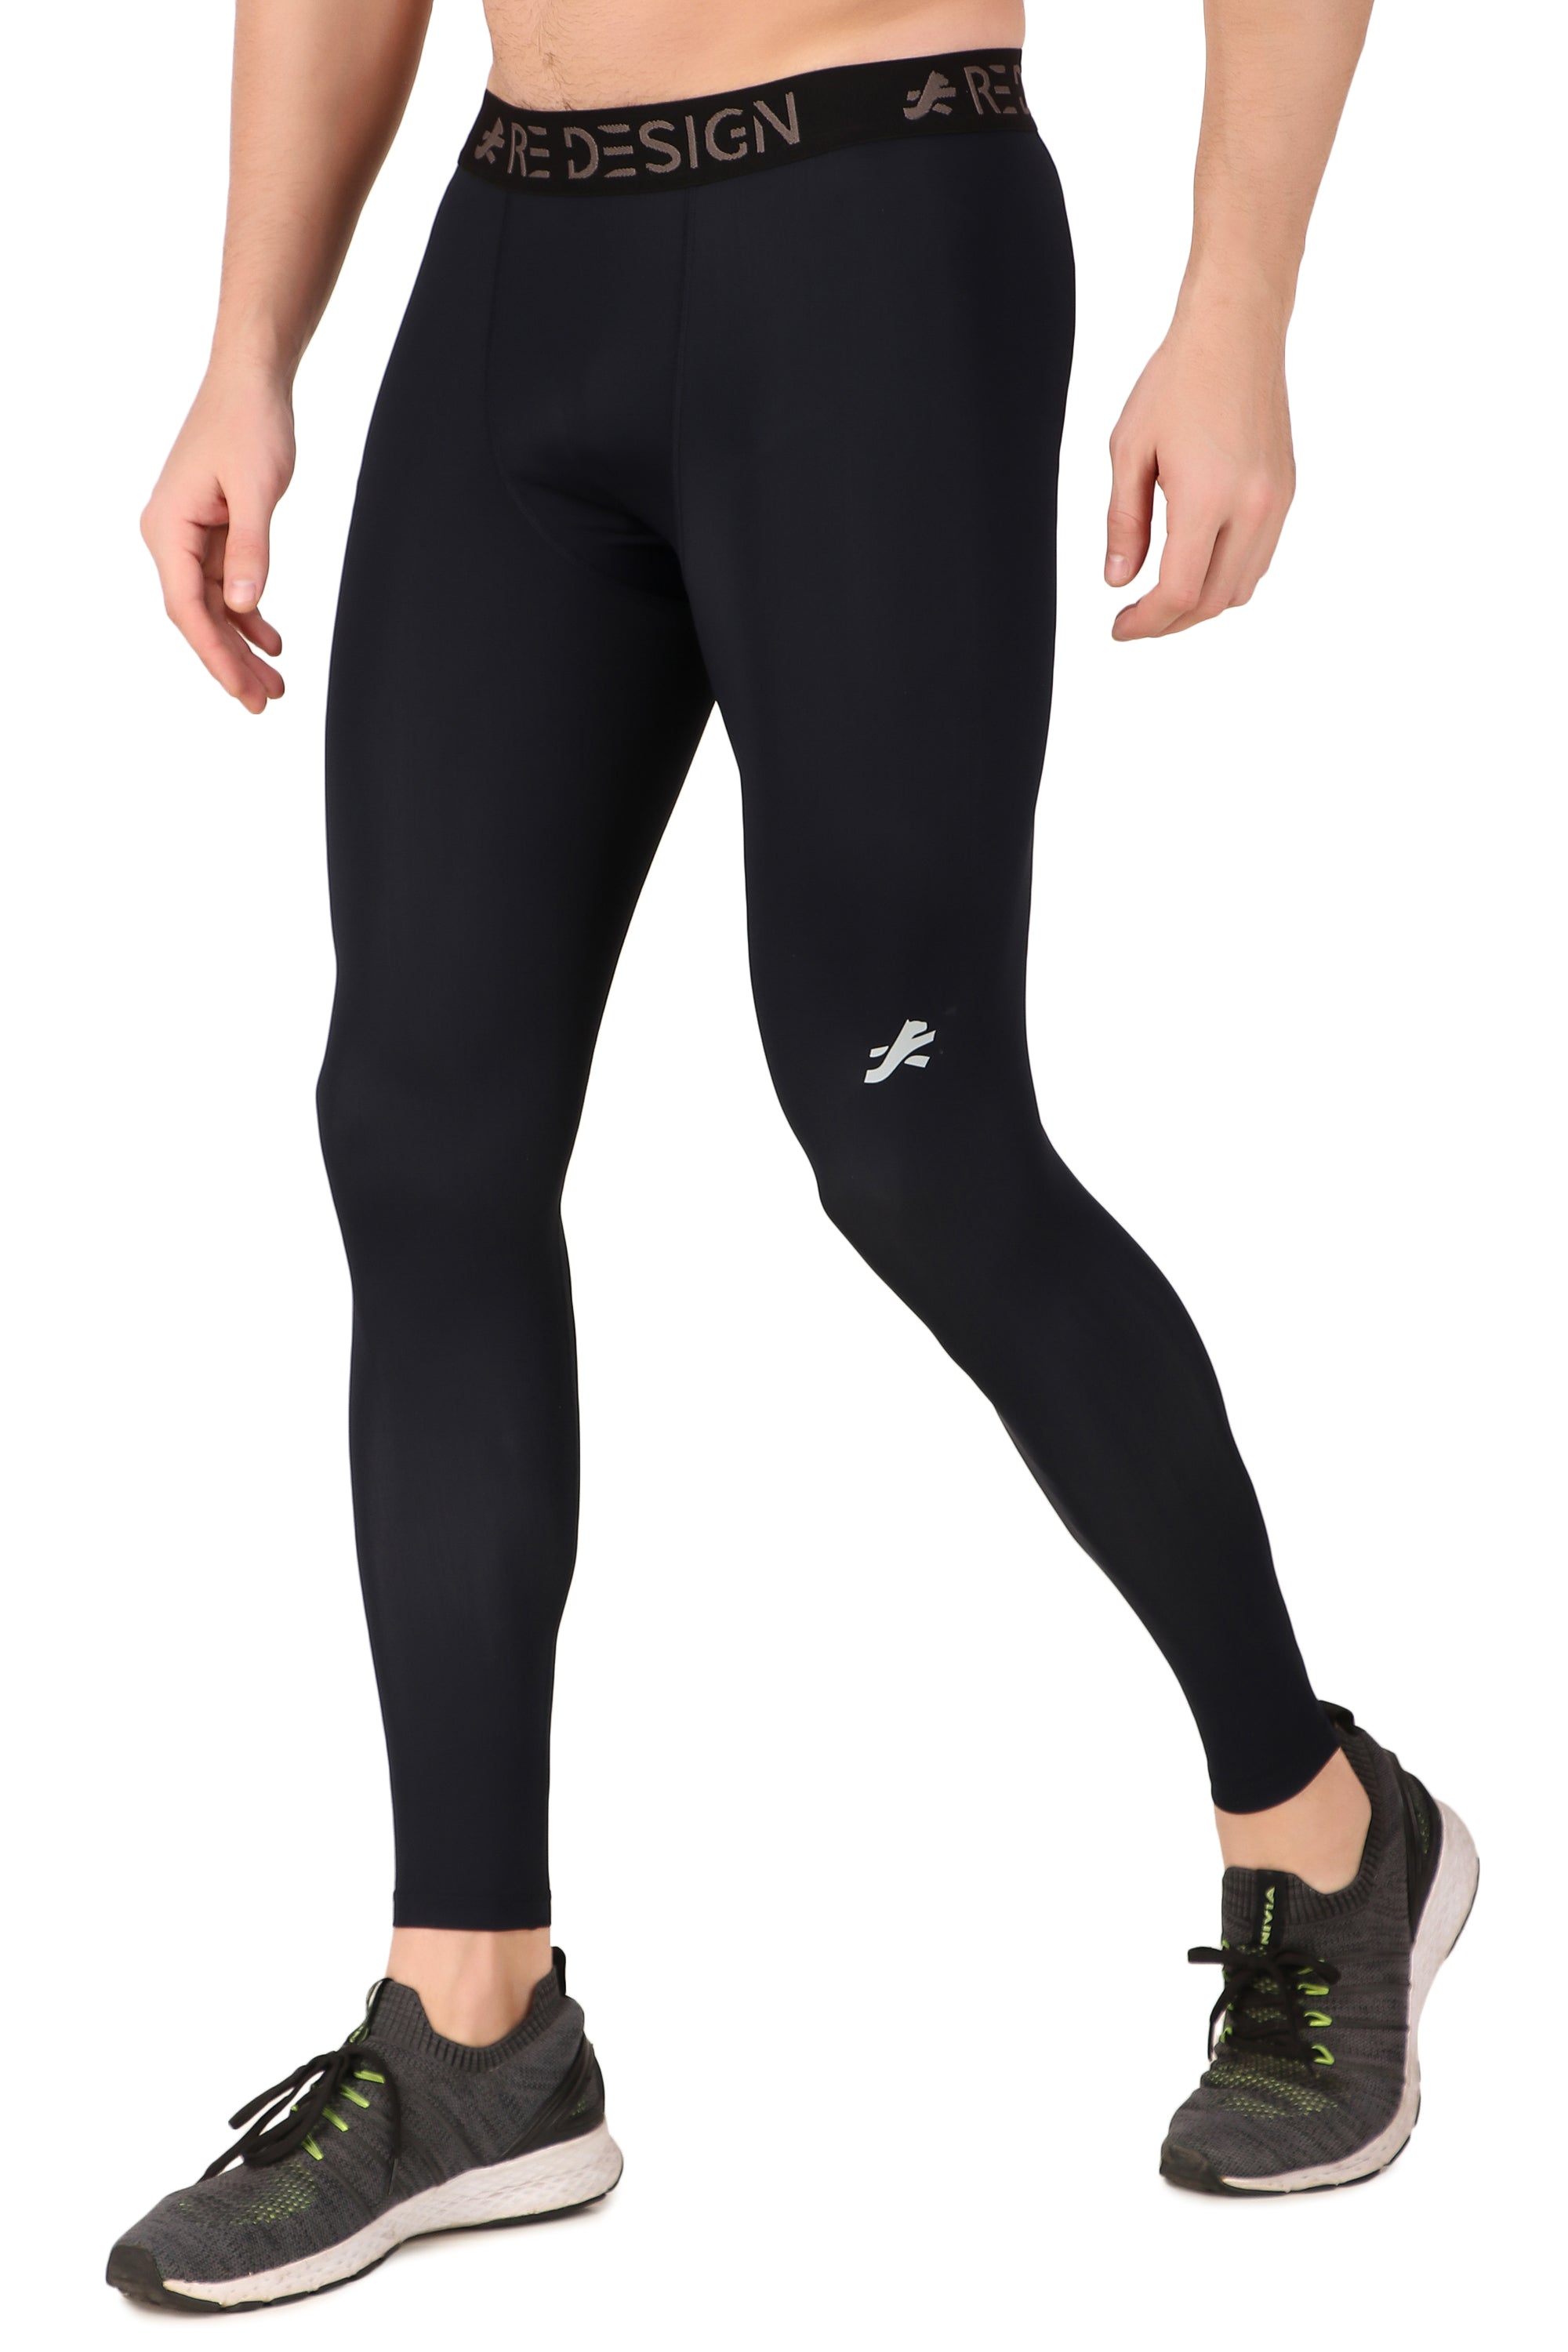 Nylon Compression Pant and Full Tights For Men (Navy Blue)